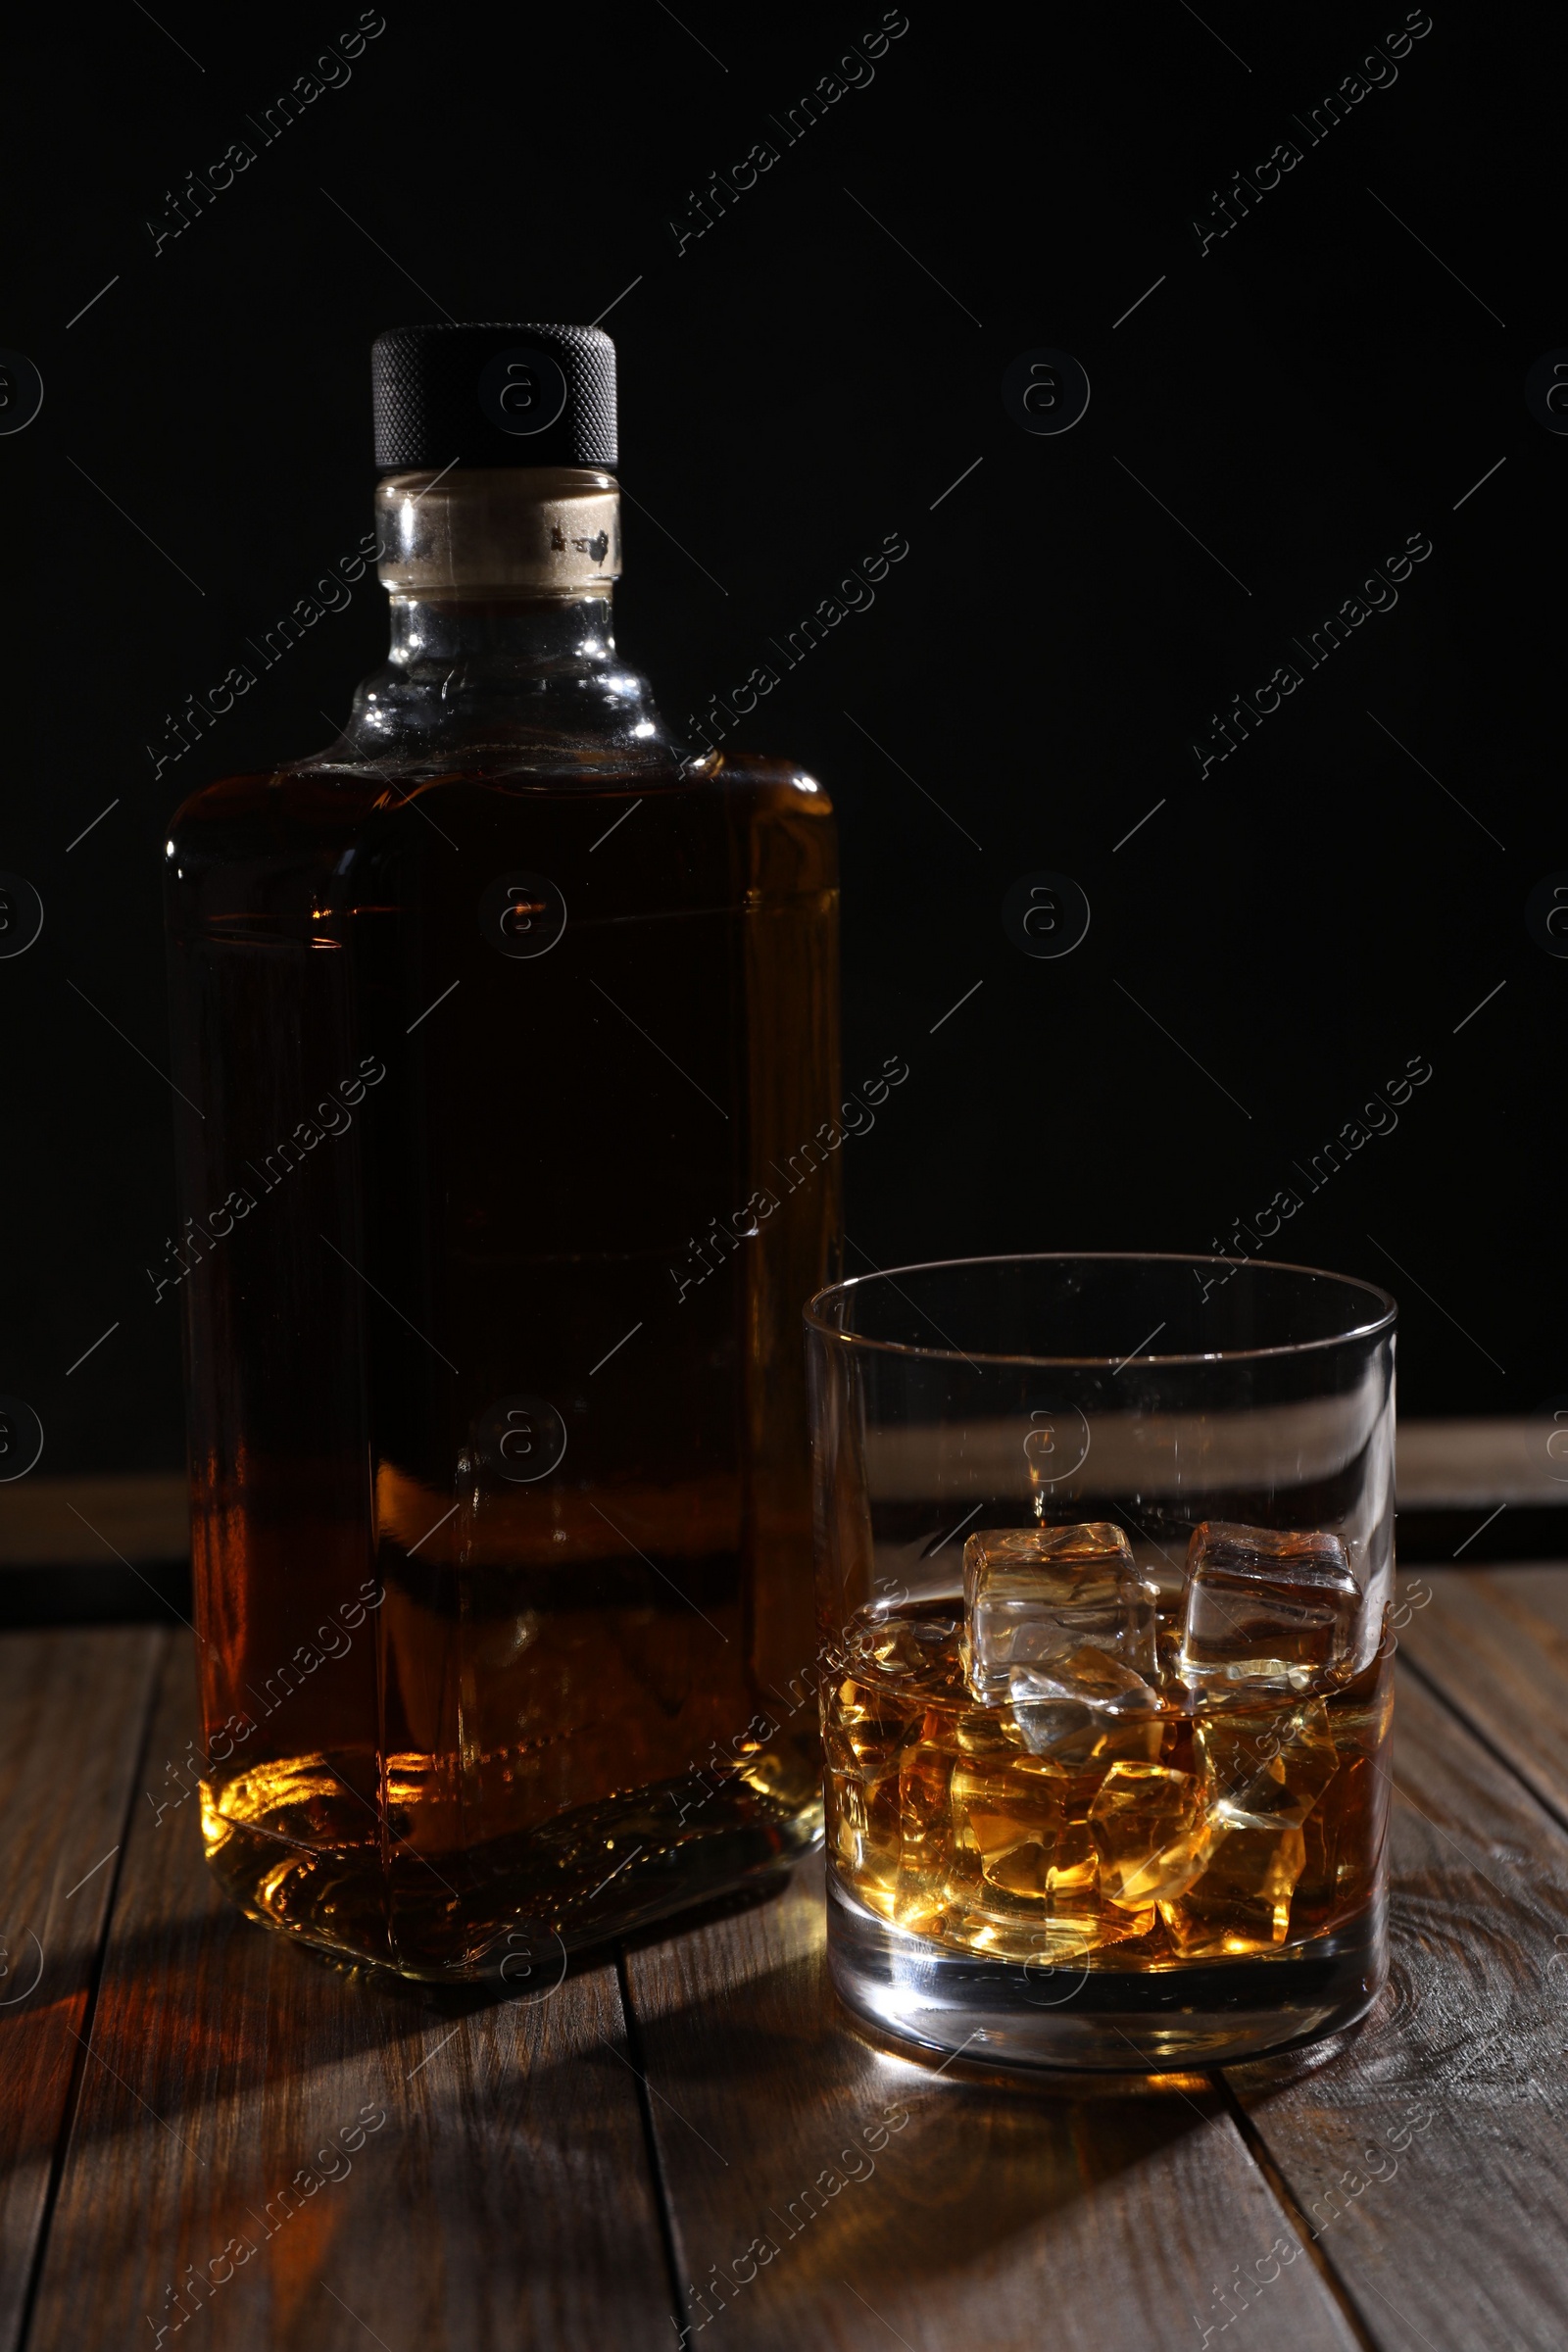 Photo of Whiskey with ice cubes in glass and bottle on wooden crate against black background